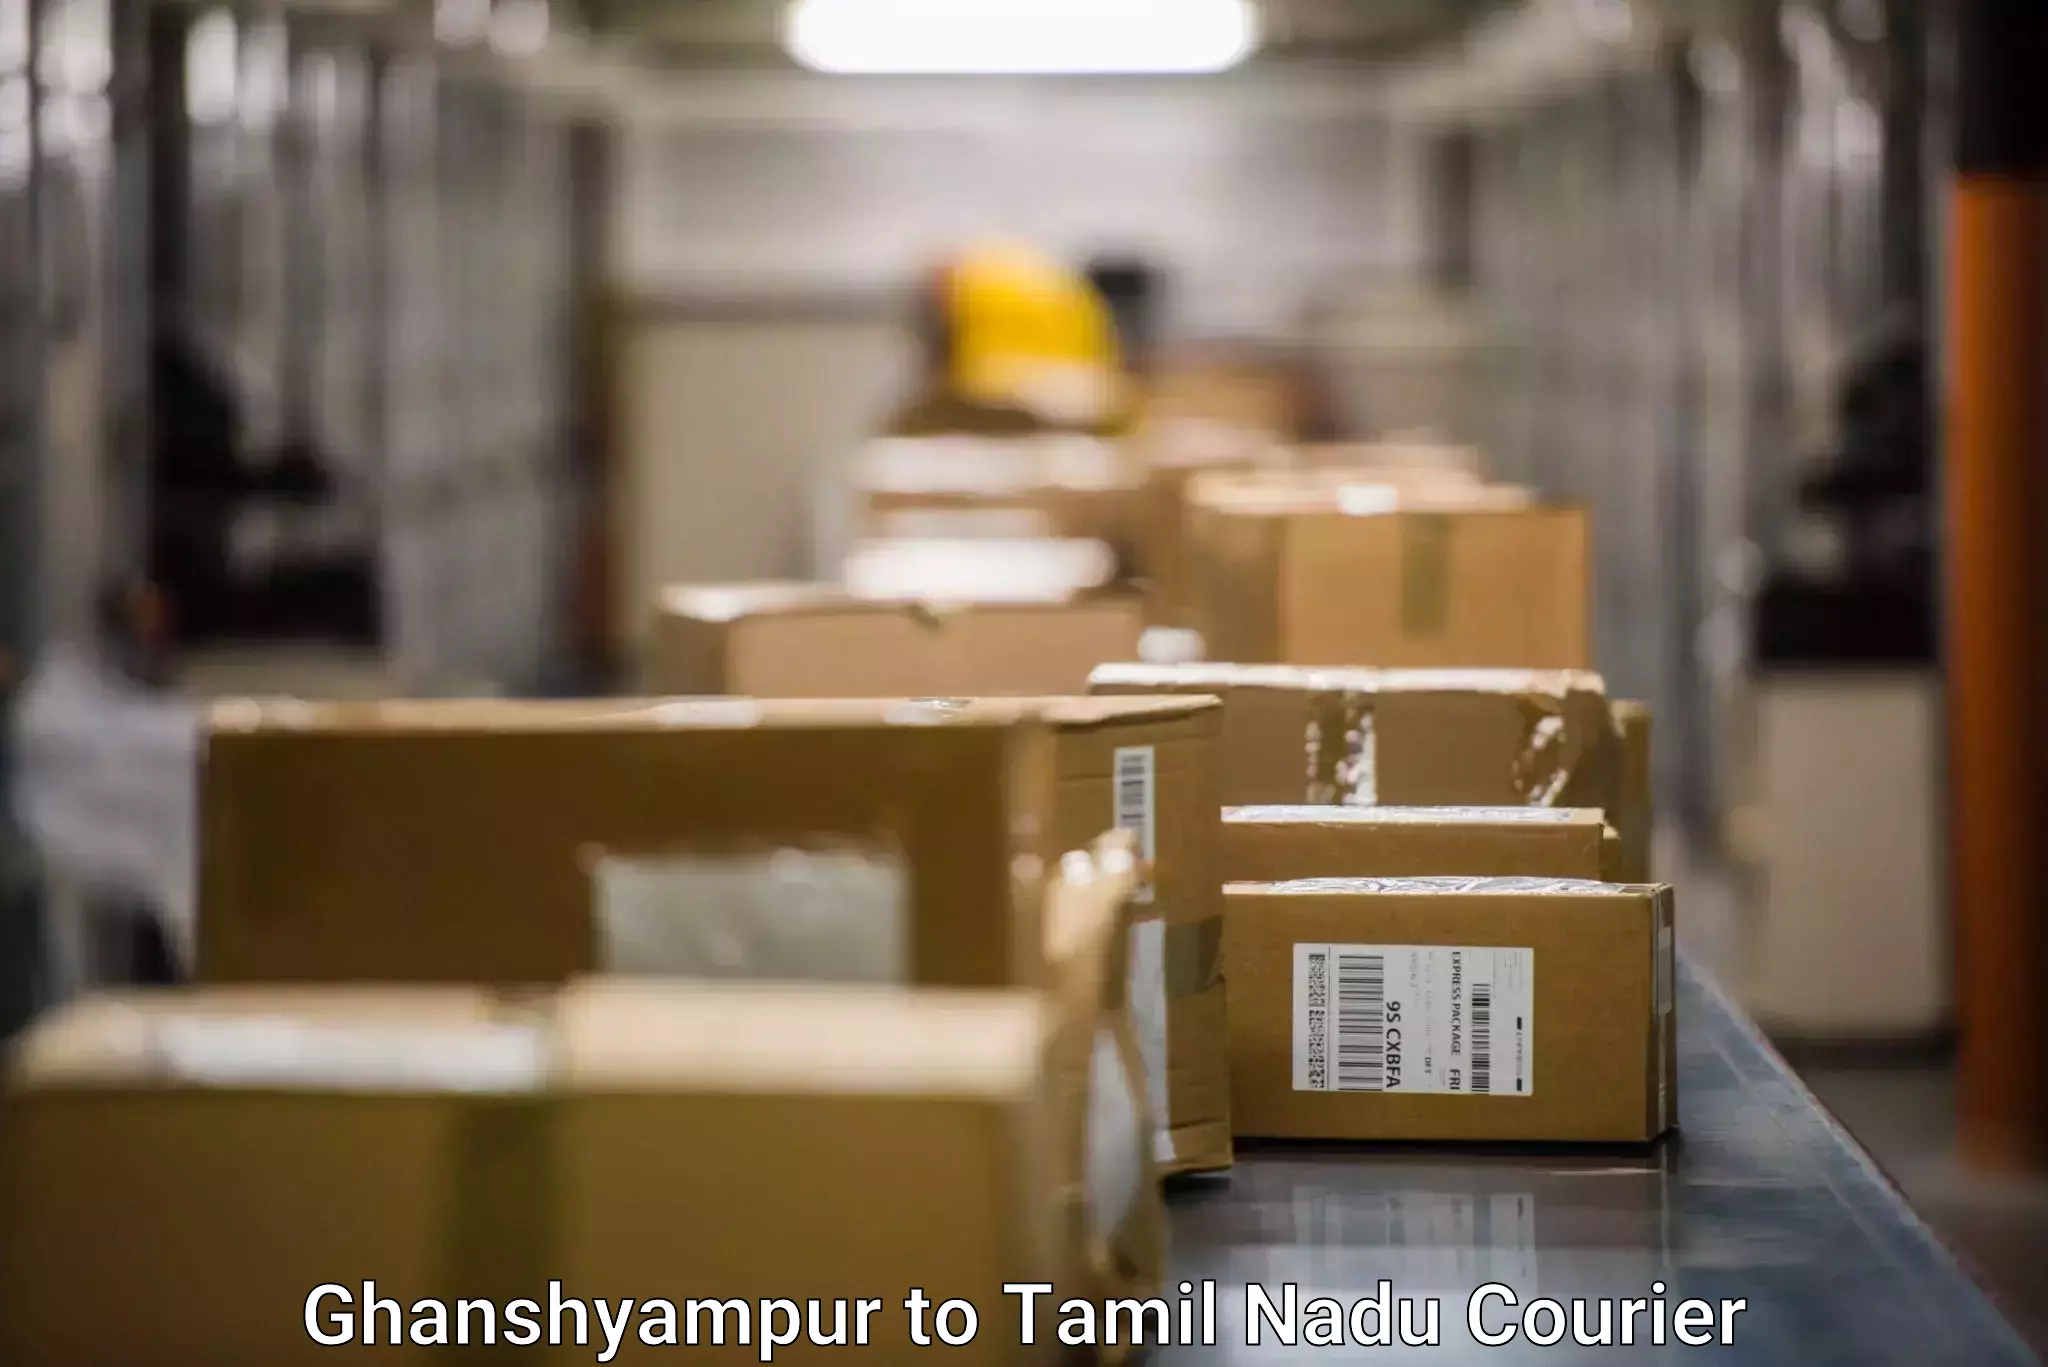 Speedy delivery service Ghanshyampur to Sathyamangalam